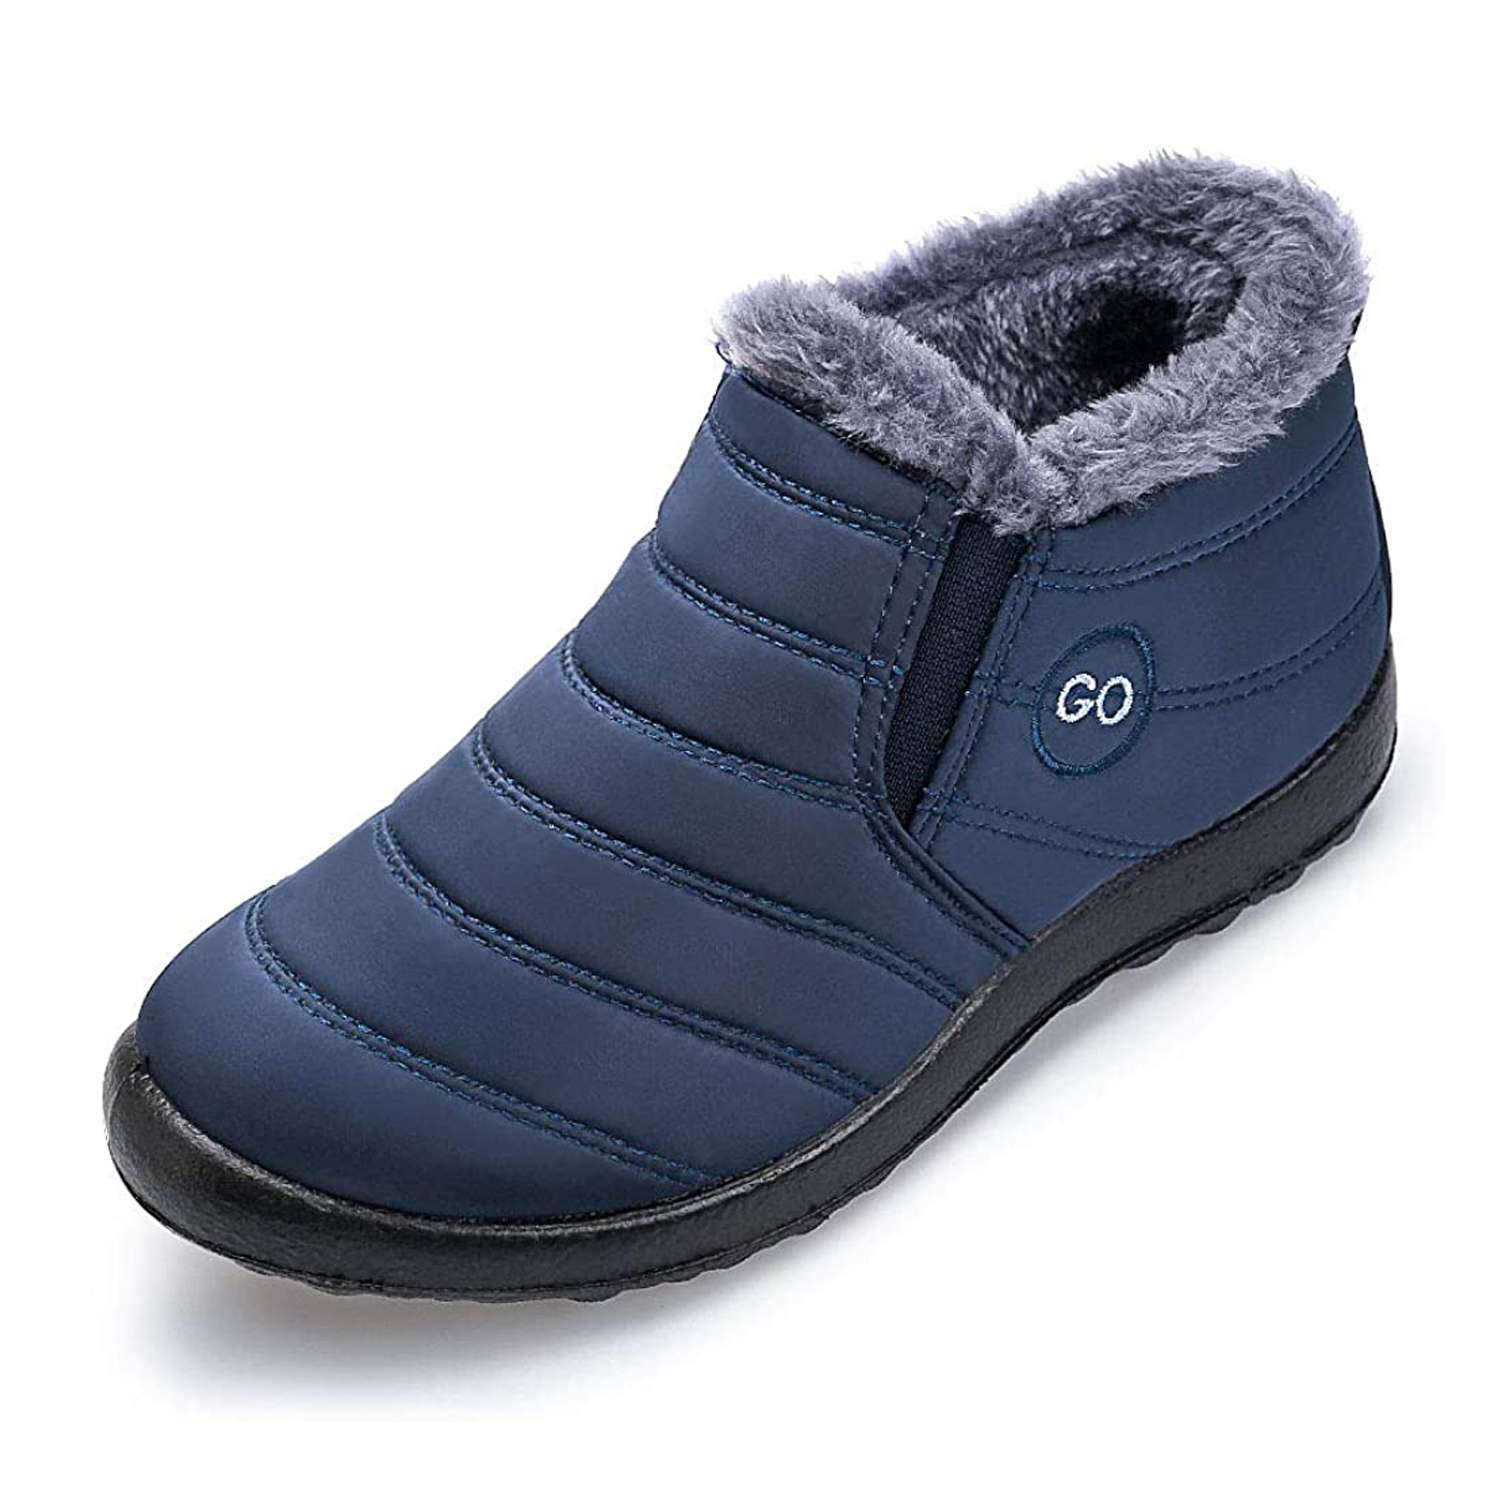 The Harence Slip-on Winter Boots Have 3,800 Perfect Amazon Ratings ...